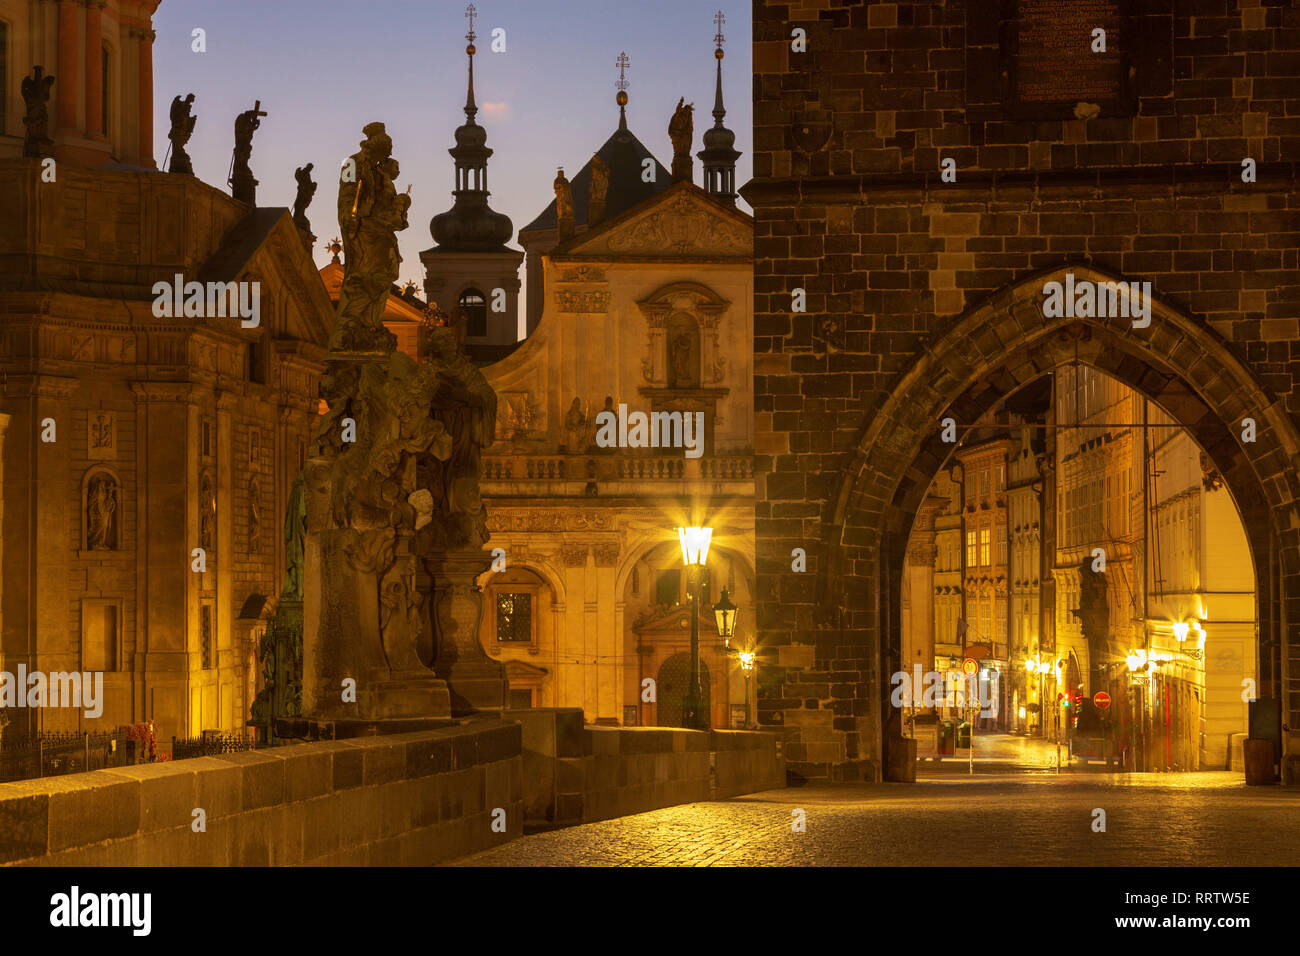 Praghe - The tower of Charles bridge and Křižovnické square in the morning. Stock Photo